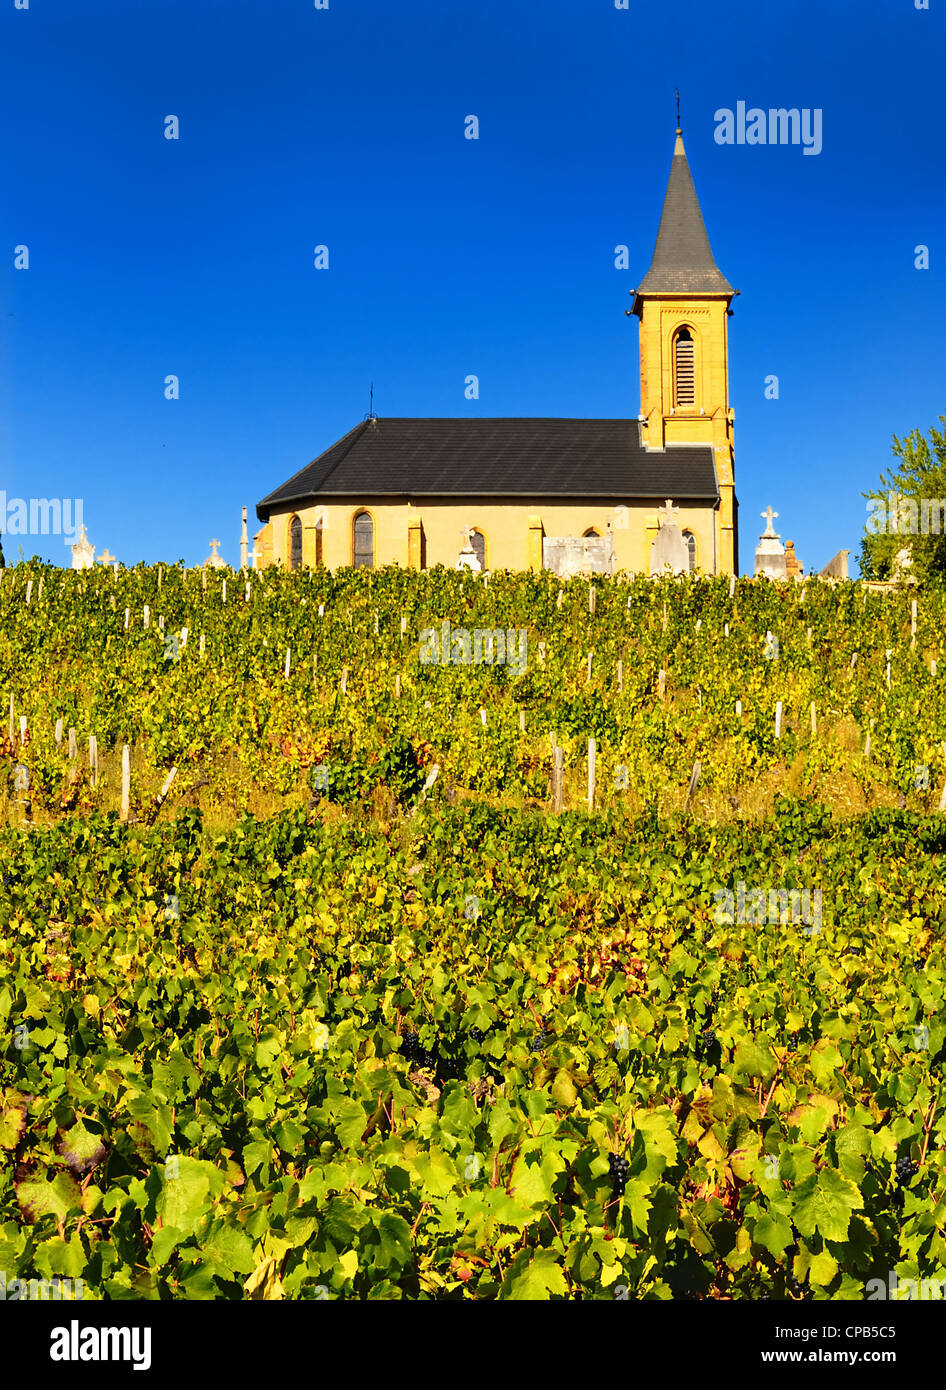 Rows of vines to sunrise with church in background Stock Photo